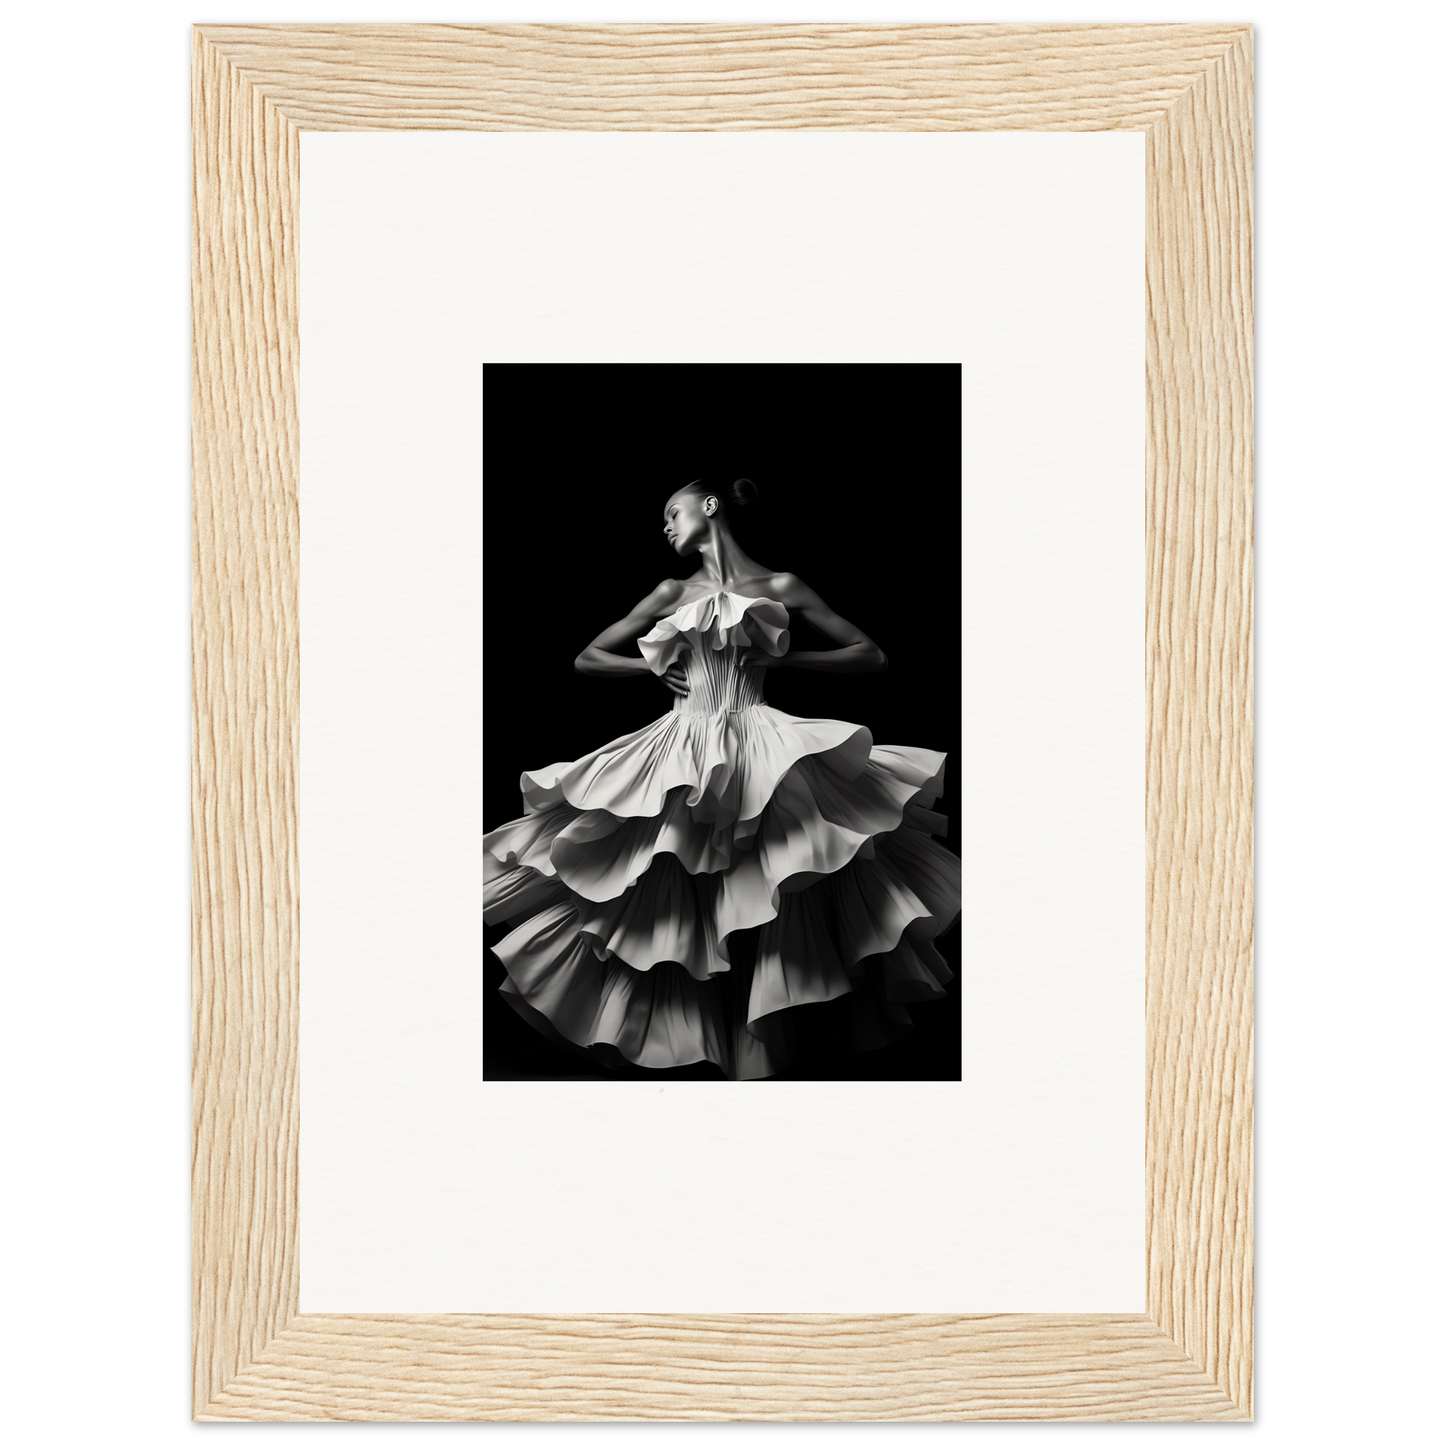 Dancers and time a2 - framed poster - 13x18 cm / 5x7″ / wood